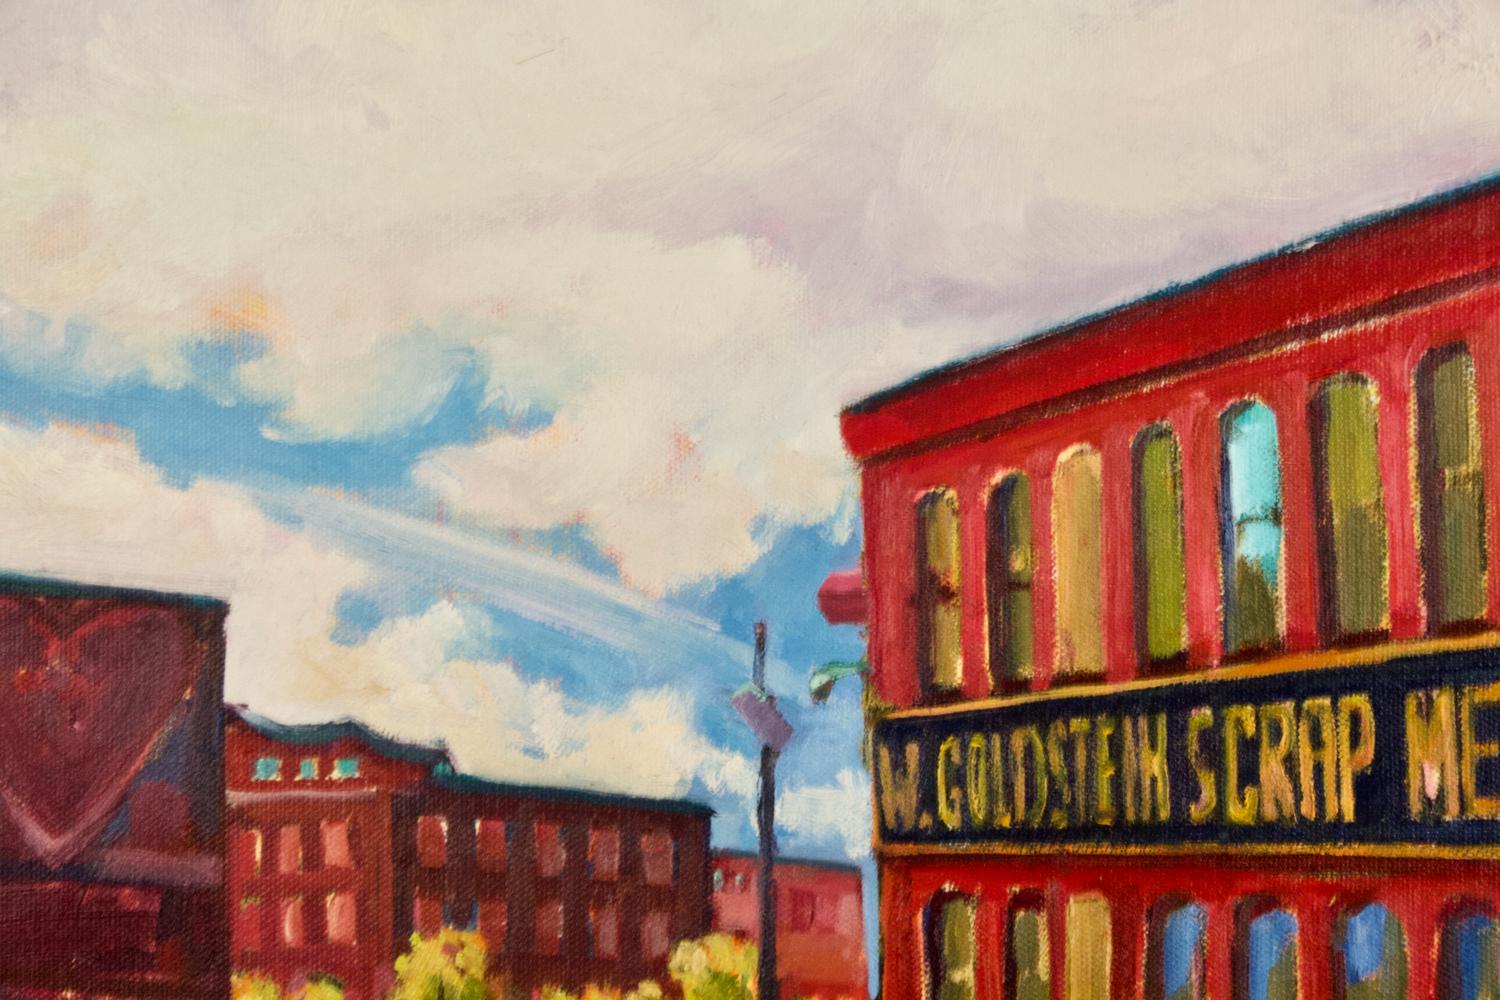 Jill Pottle’s urban landscape titled “View from train station, Worcester, MA” is an oil painting on canvas and part of a series of urban-scapes. Note the rich underpainting with the strong reds of the industrial buildings with dramatic perspective